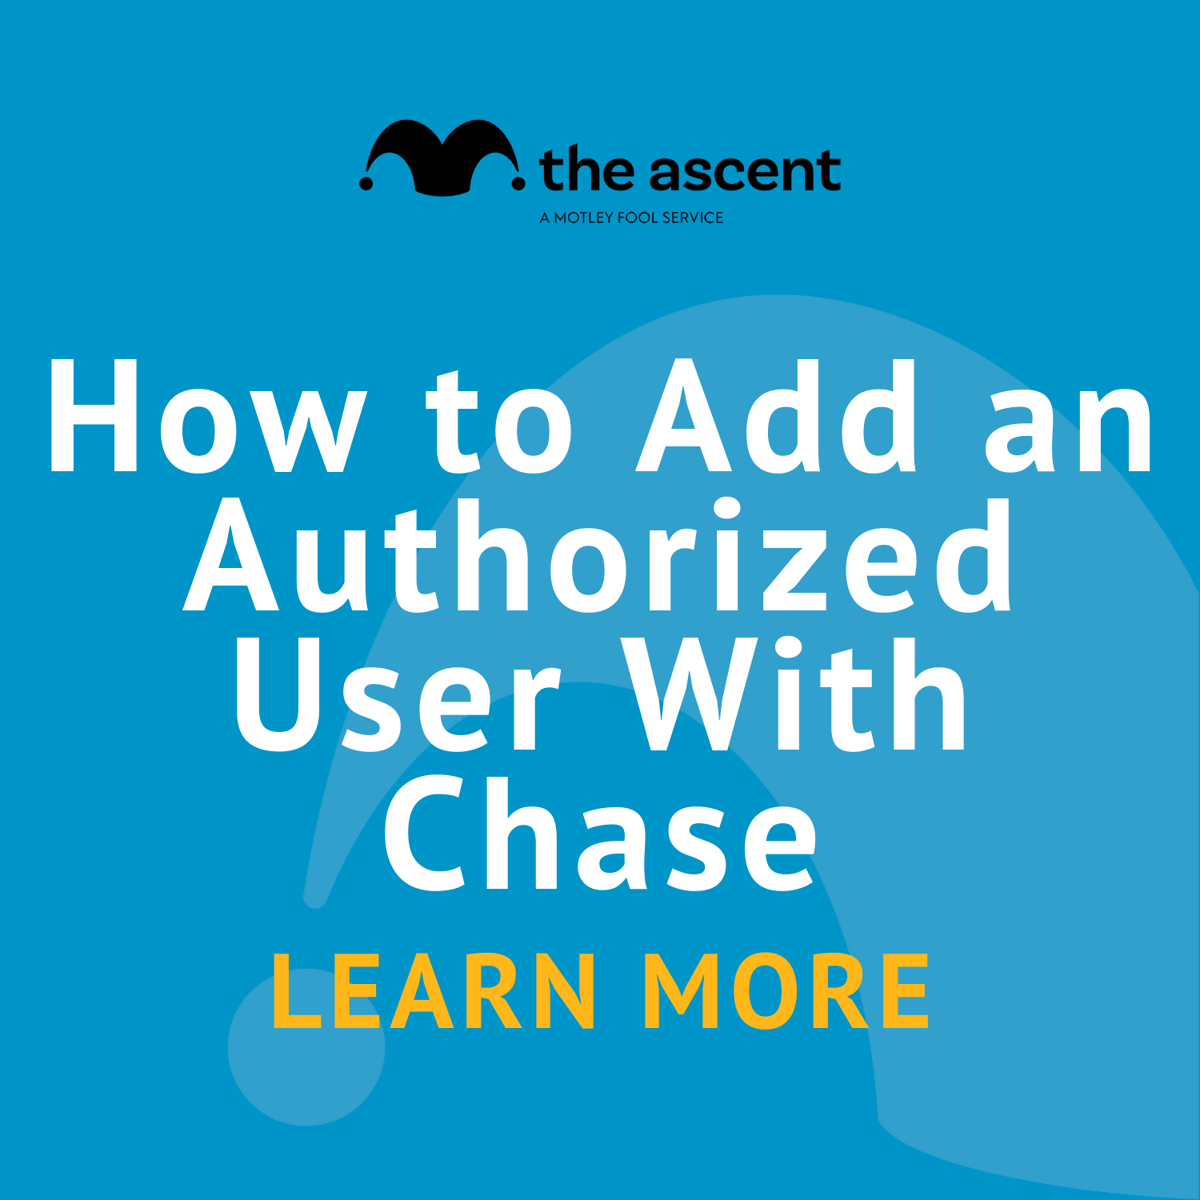 How to Add an Authorized User With Chase